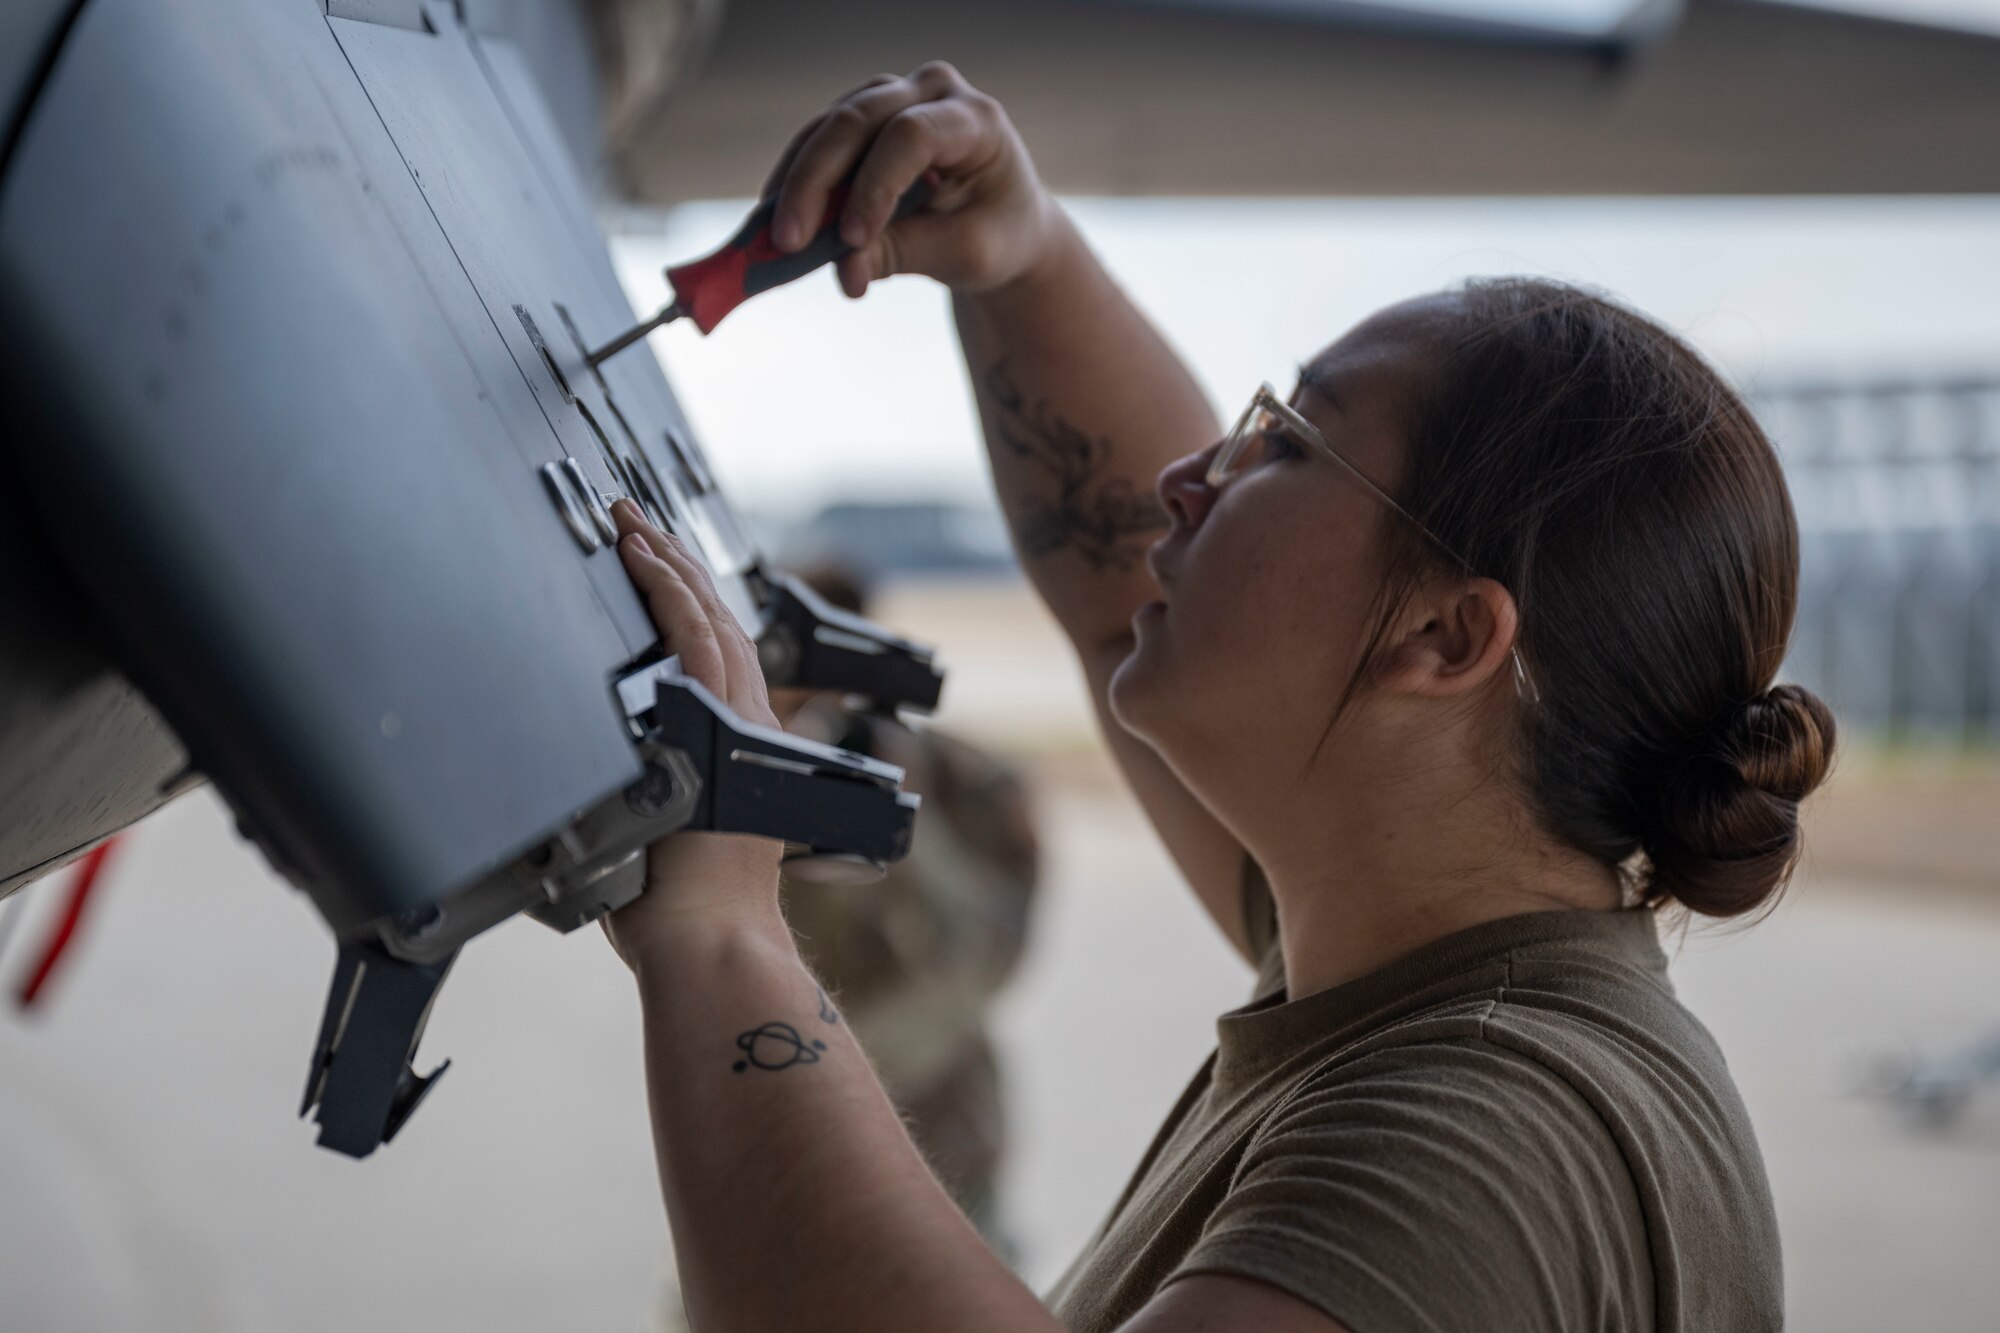 Senior Airman Savannah Hogge, 336th Fighter Generation Squadron weapons load crew member, tightens a screw on an F-15E Strike Eagle during a weapon load crew of the year competition at Seymour Johnson Air Force Base, North Carolina, Feb. 10, 2023. Load crew competitions prepare airmen for fast paced operations they may experience while deployed.